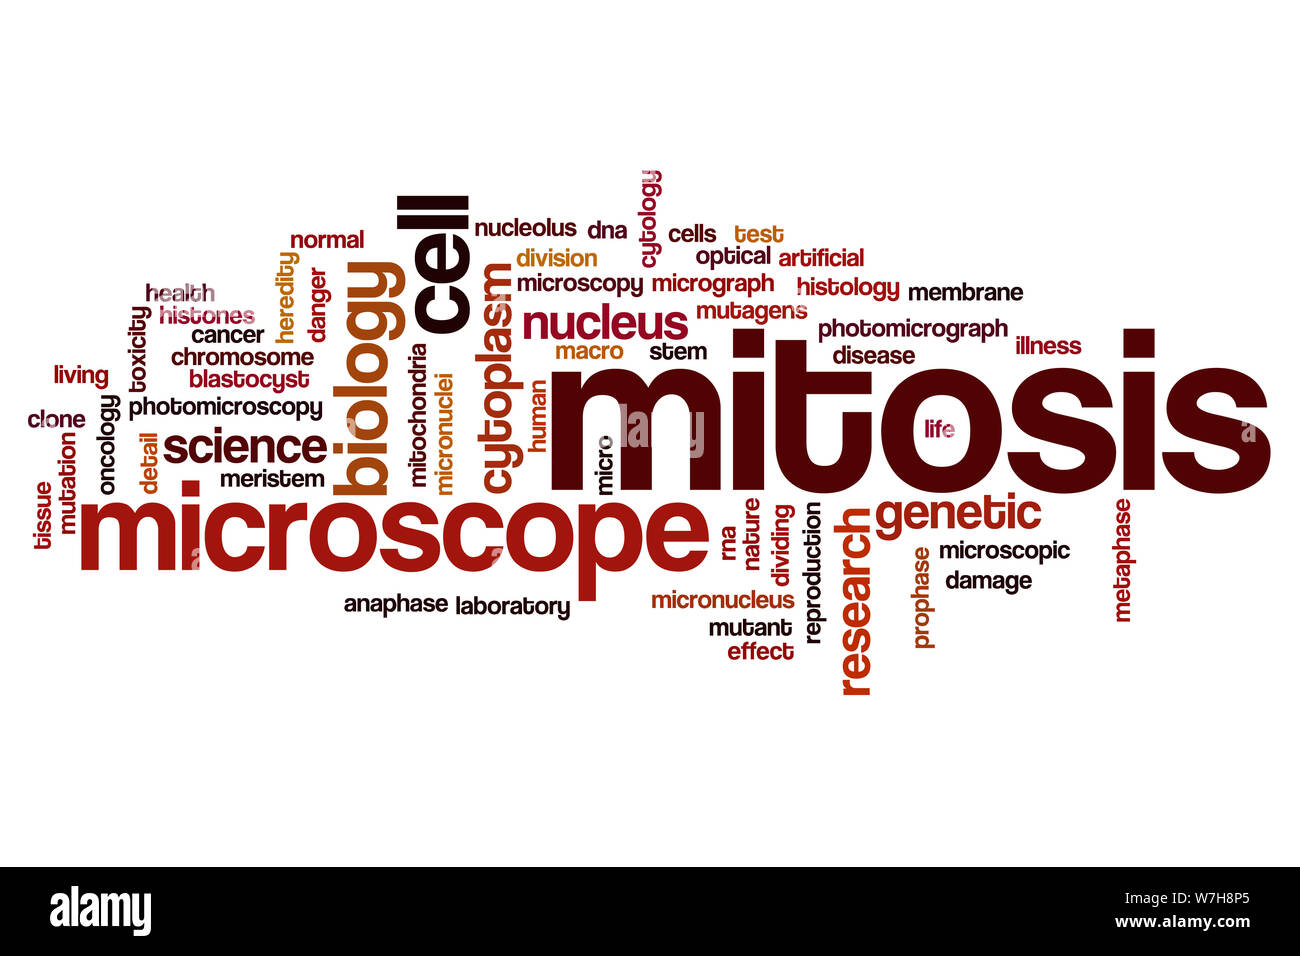 Mitosis word cloud concept Stock Photo